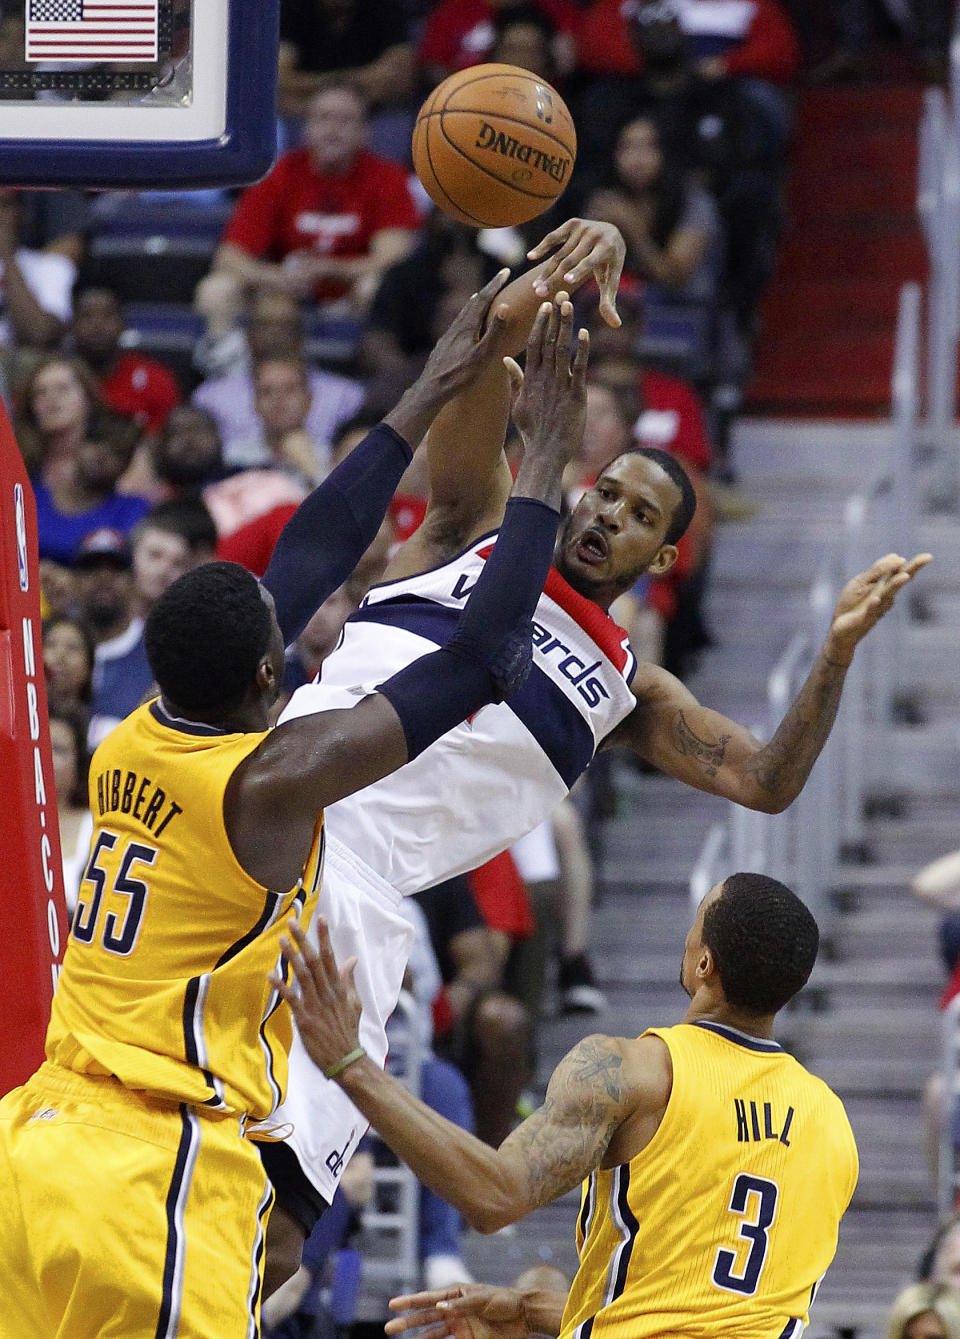 Washington Wizards forward Trevor Ariza (1) passes over Indiana Pacers center Roy Hibbert (55) and Indiana Pacers guard George Hill (3) during the second half of Game 4 of an Eastern Conference semifinal NBA basketball playoff game in Washington, Sunday, May 11, 2014. (AP Photo/Alex Brandon)